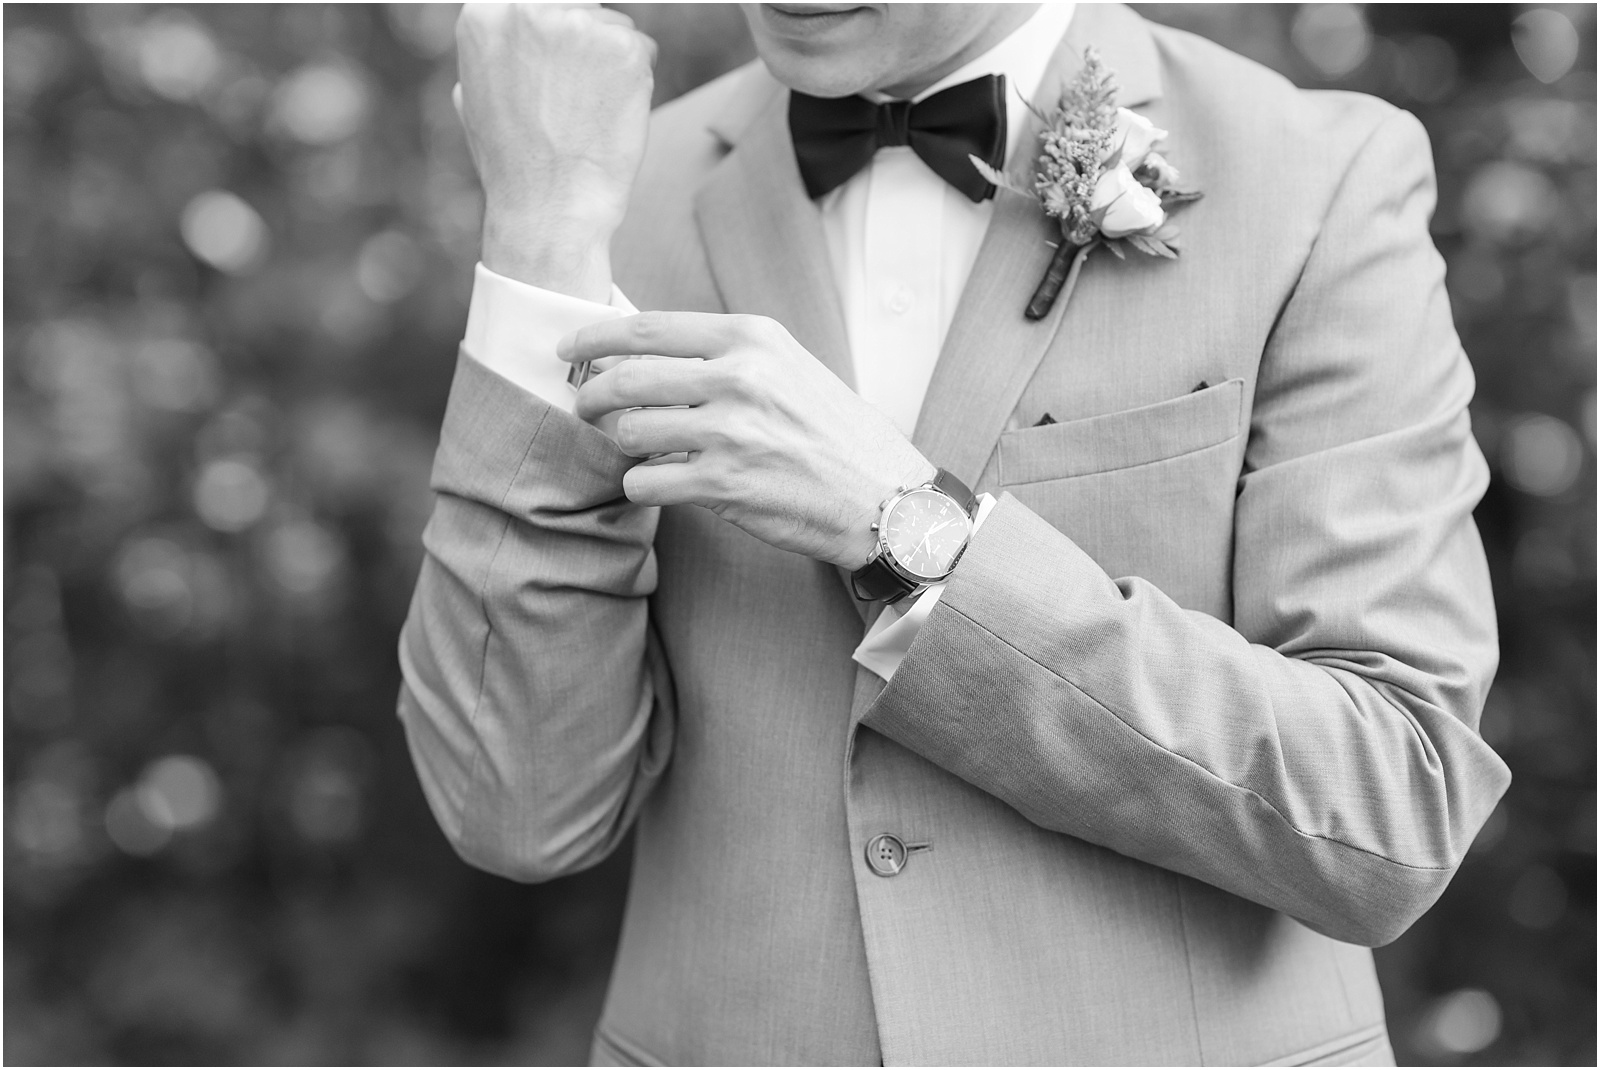 a black and white photograph of a groom fixing his cufflinks